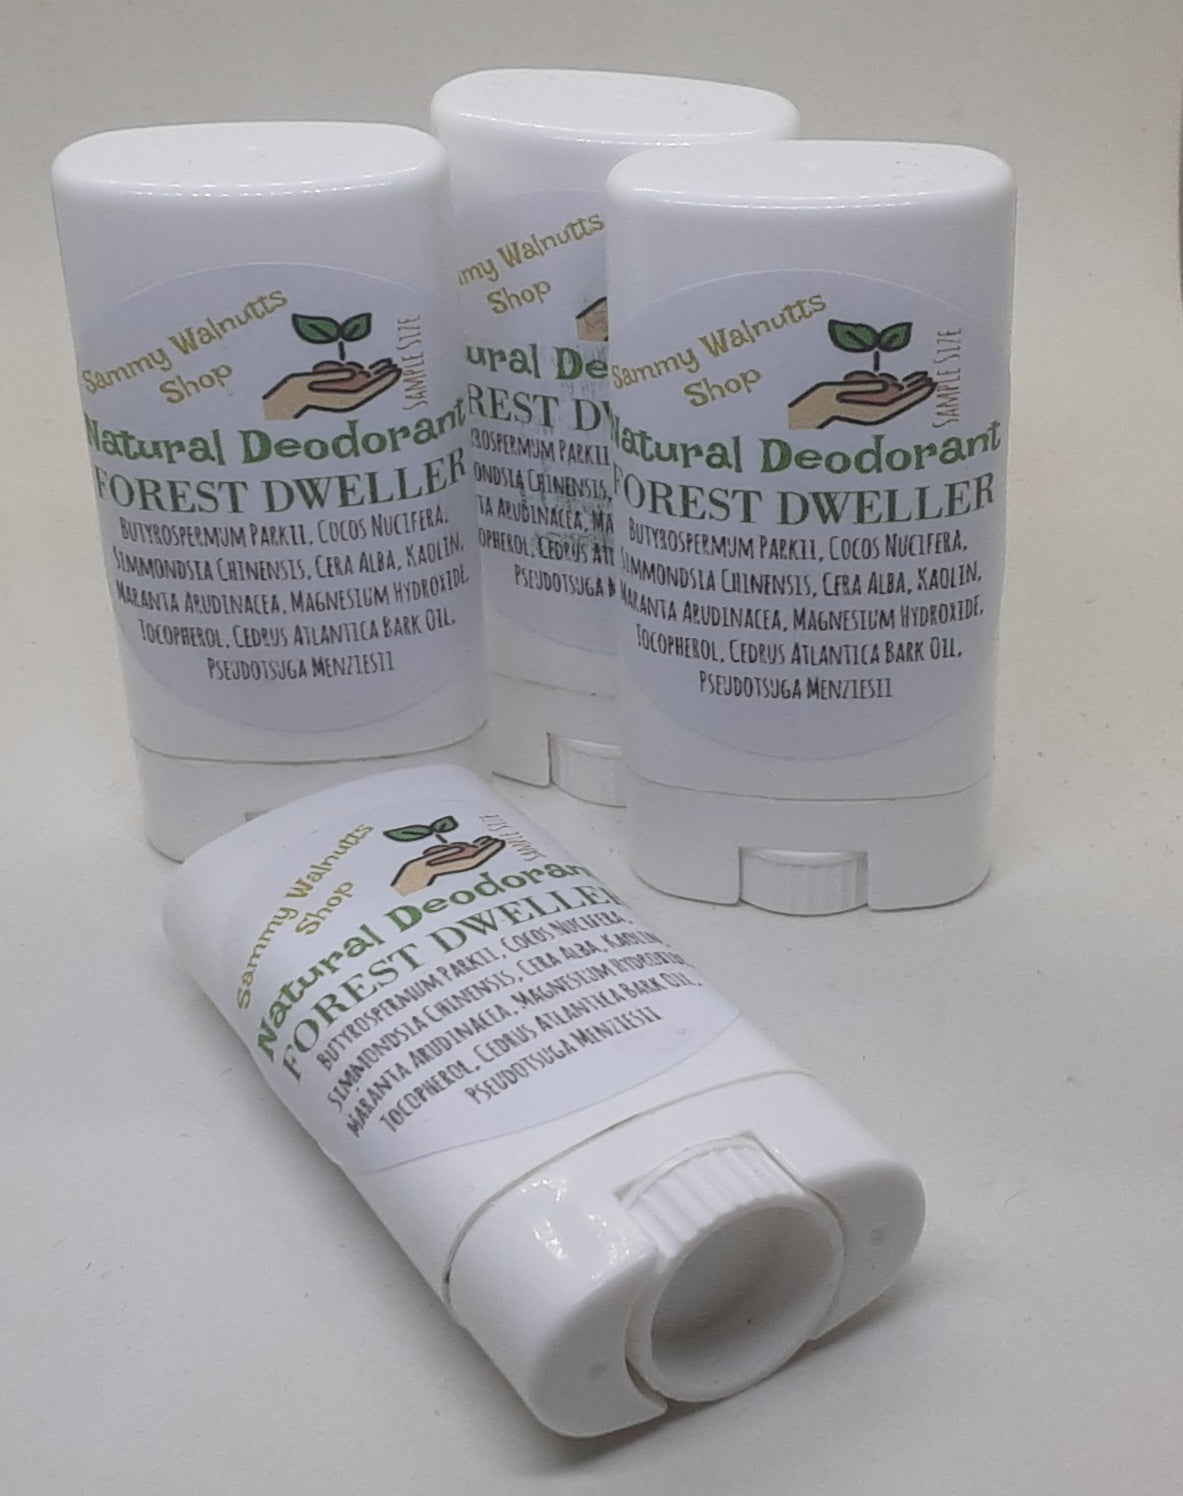 Natural Deodorants for Underarms, Décolletage and Feet, Baking Soda Free - TRAVEL SIZE